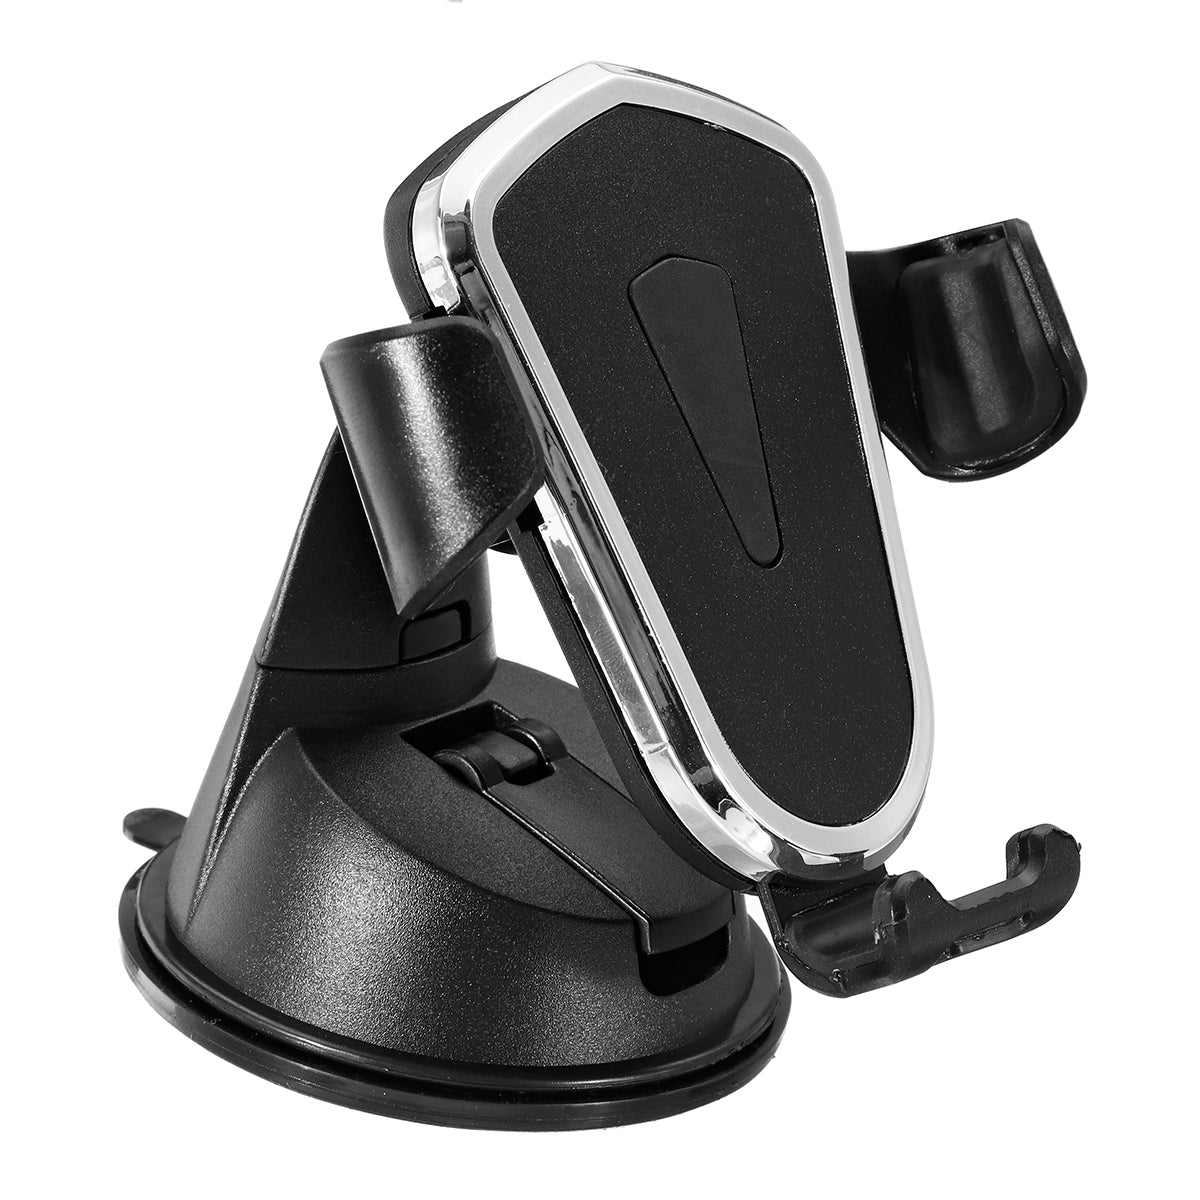 Universal Gravity Linkage Auto Lock Car Air Vent Mount Dashboard Holder for iPhone Xiaomi Mobile Phone